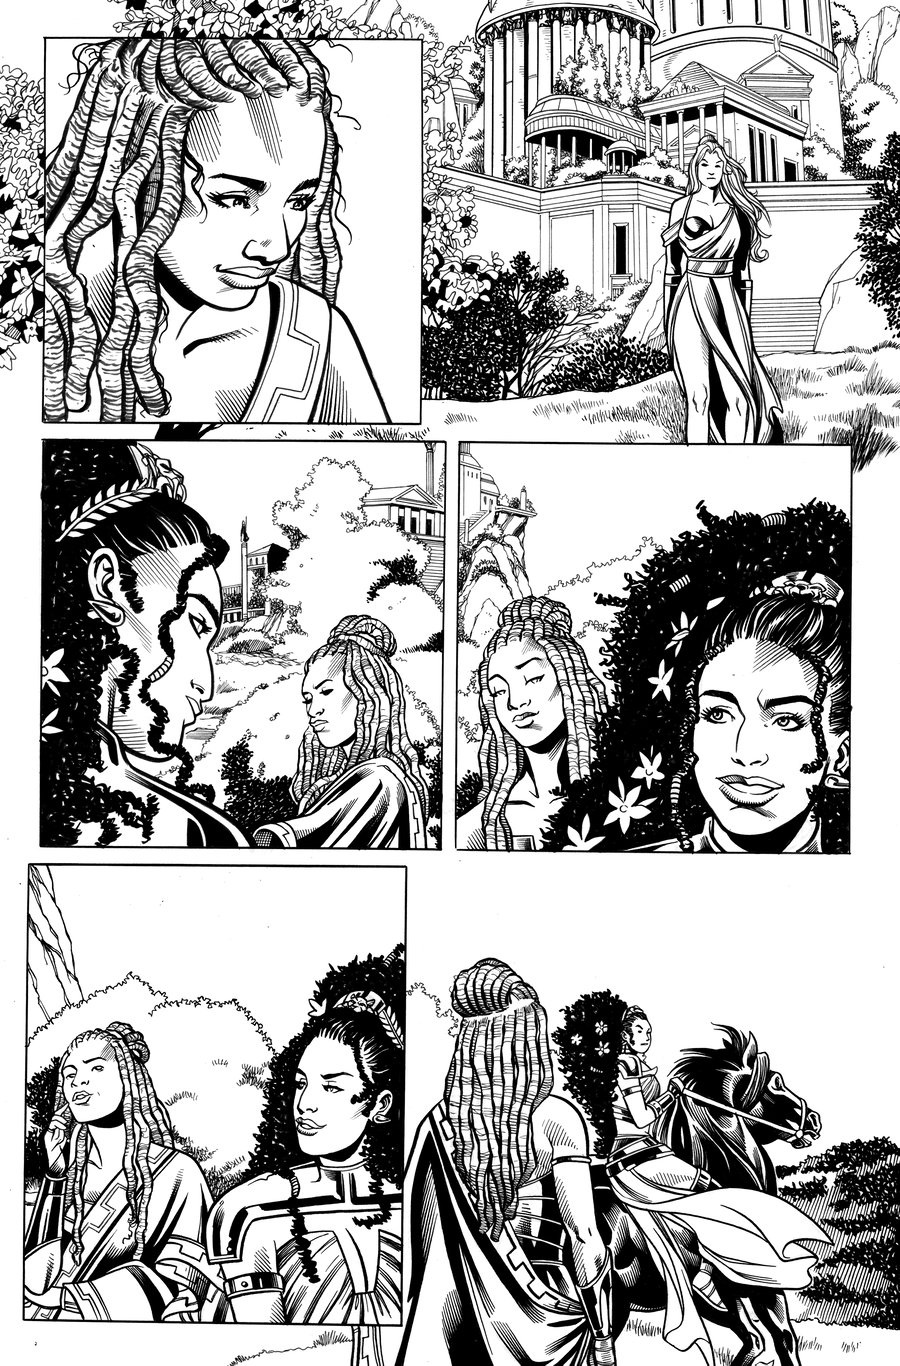 Image of Nubia and the Amazons #2 PG 11